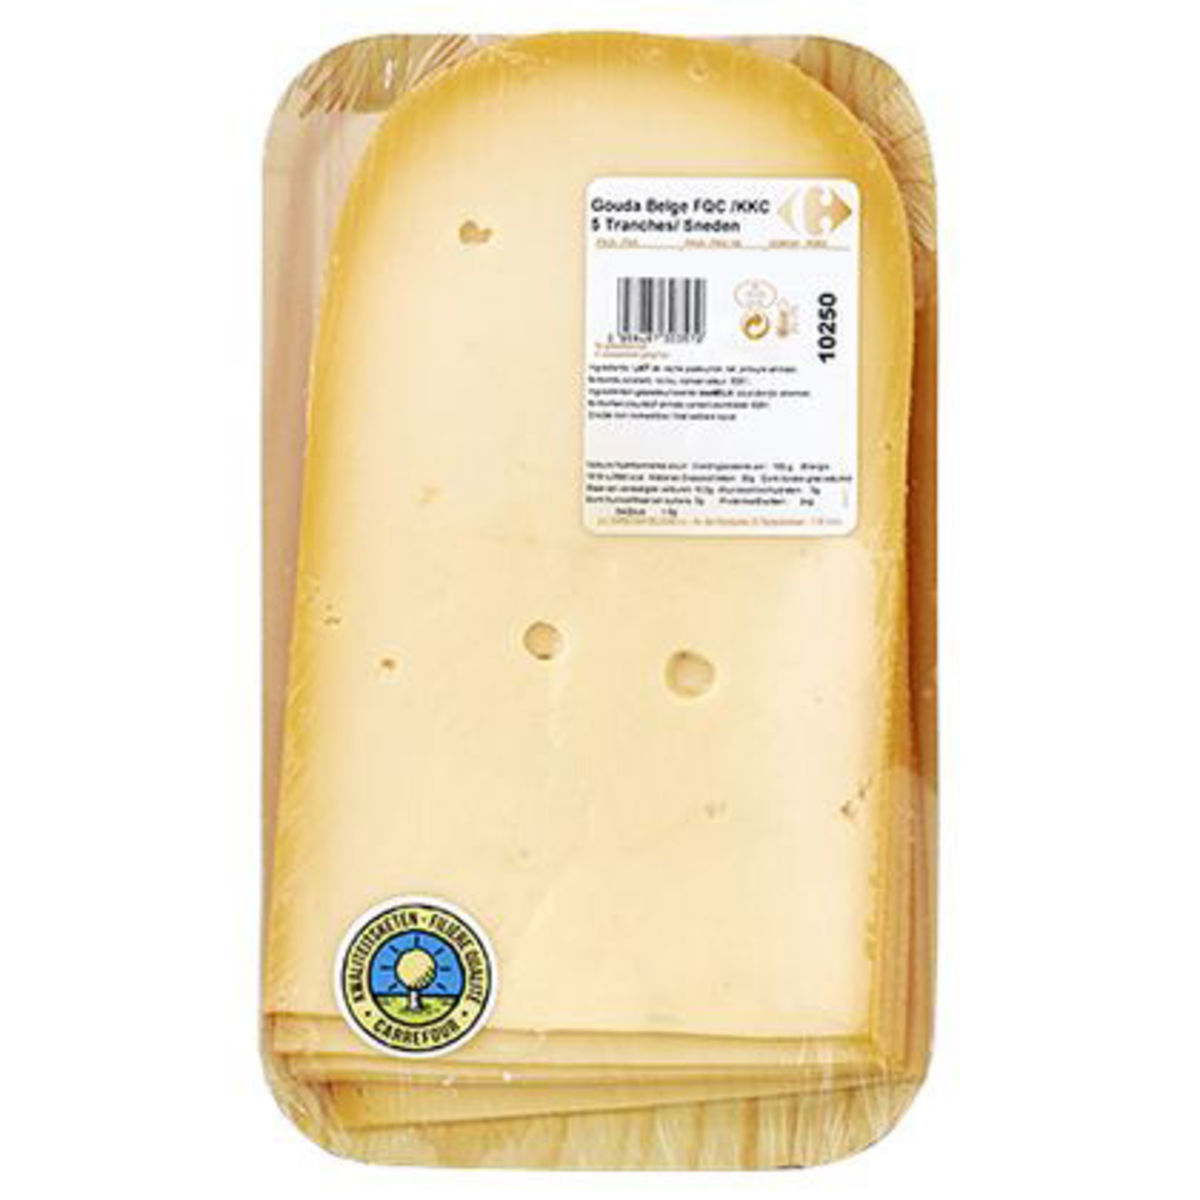 Carrefour FQC Fromage d'Abbaye 5 Tranches